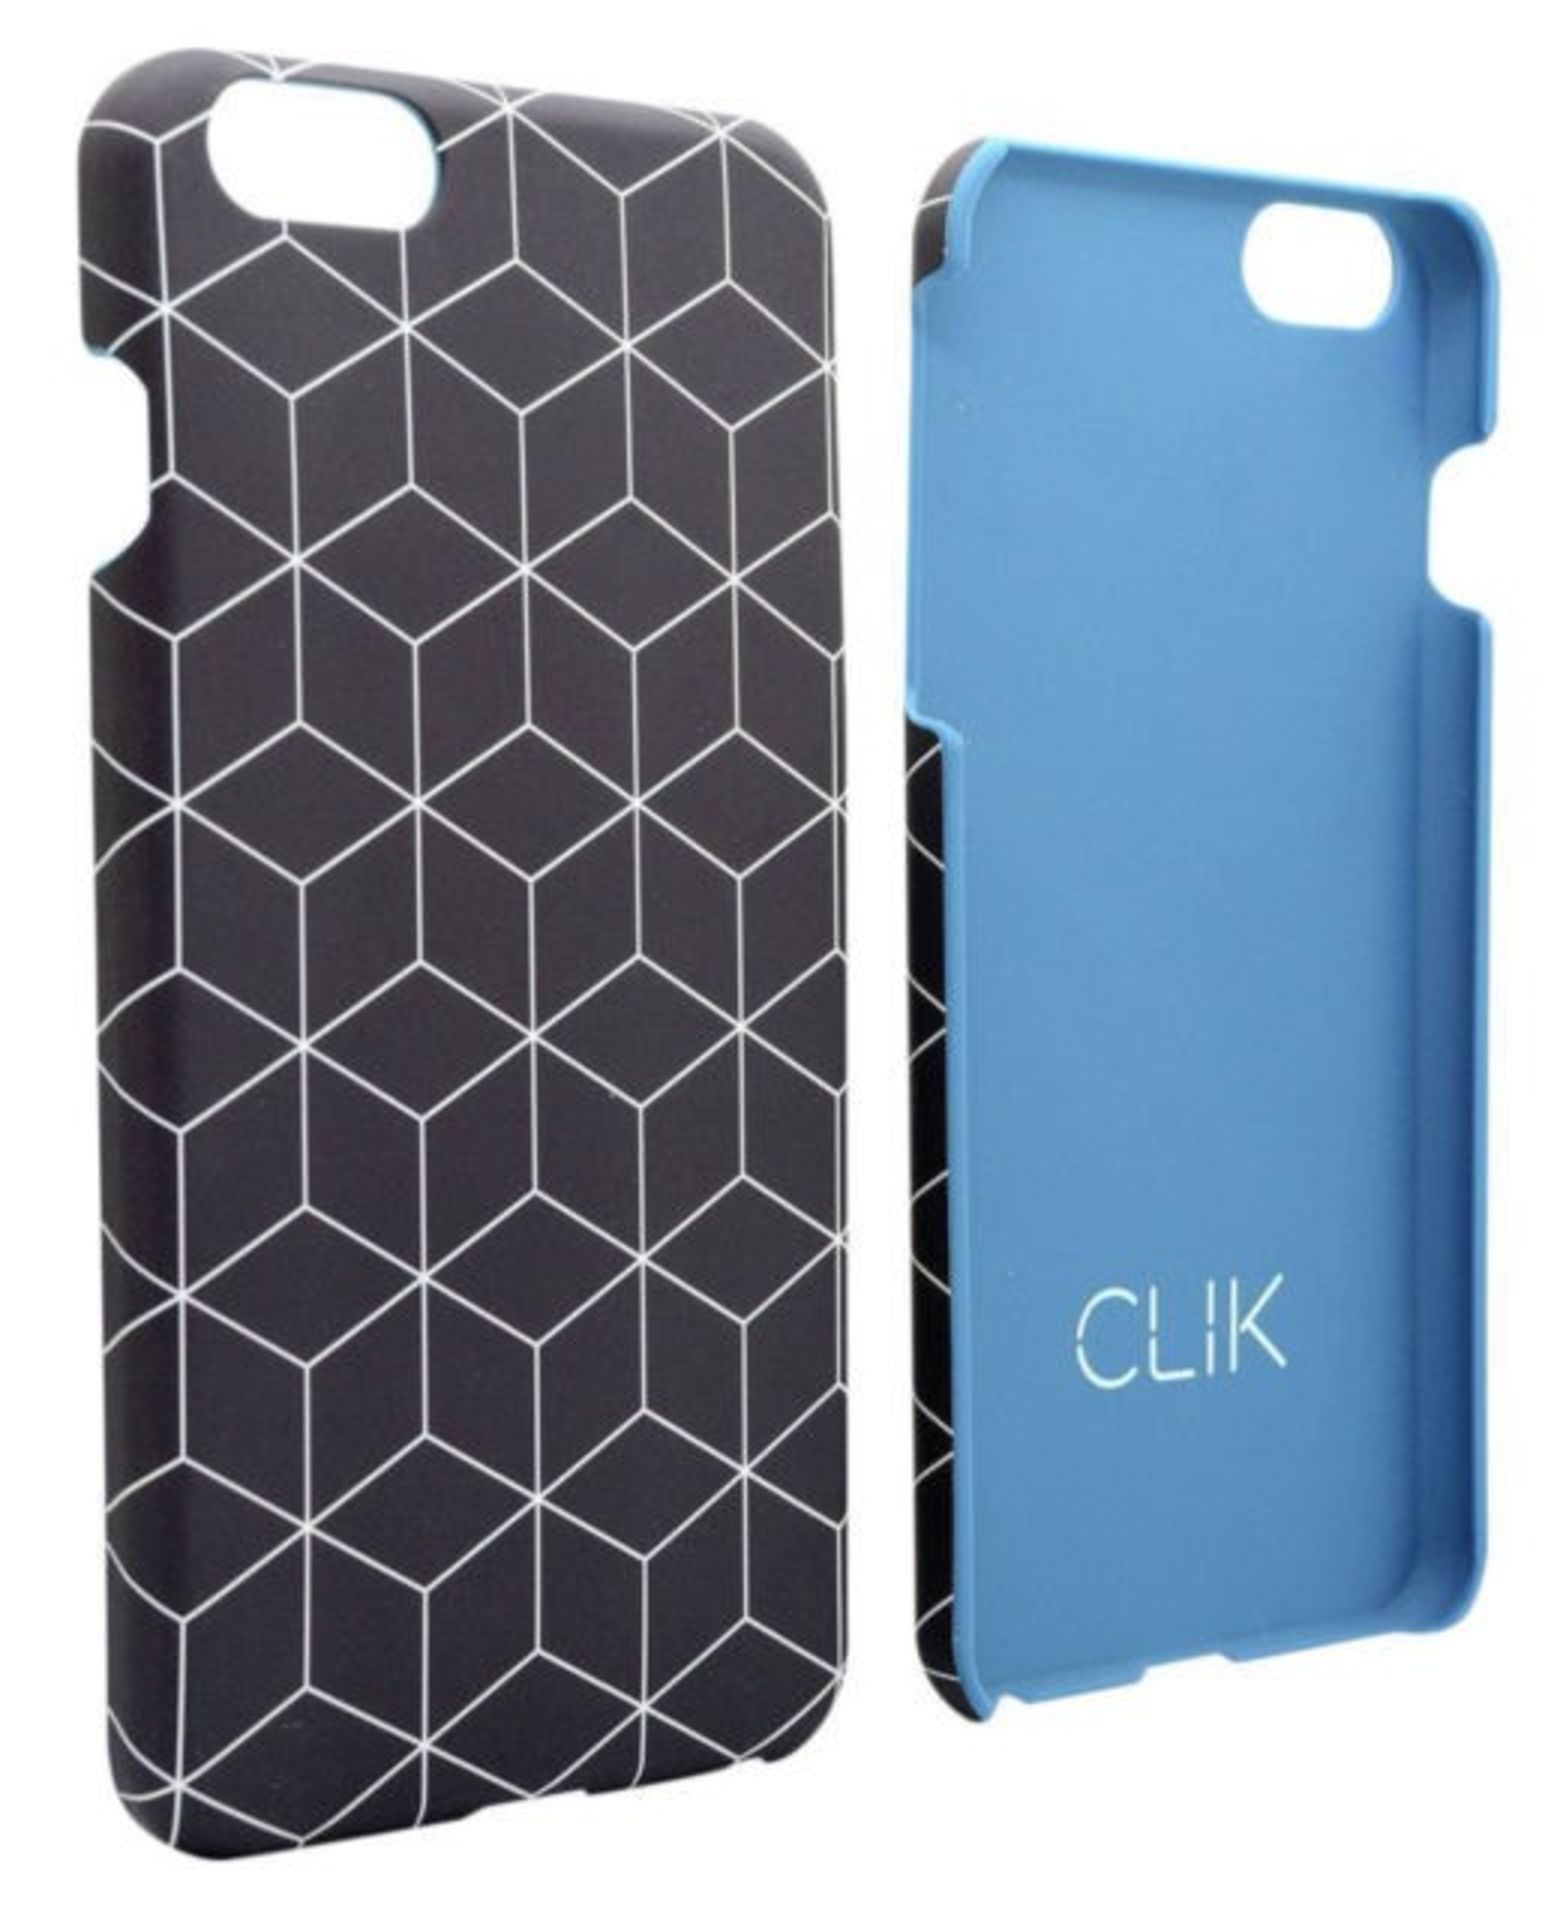 10 AS NEW BOXED CUBES IPHONE 6/S PHONE CASES IN BLACK / RRP £99.00 (VIEWING HIGHLY RECOMMENDED)